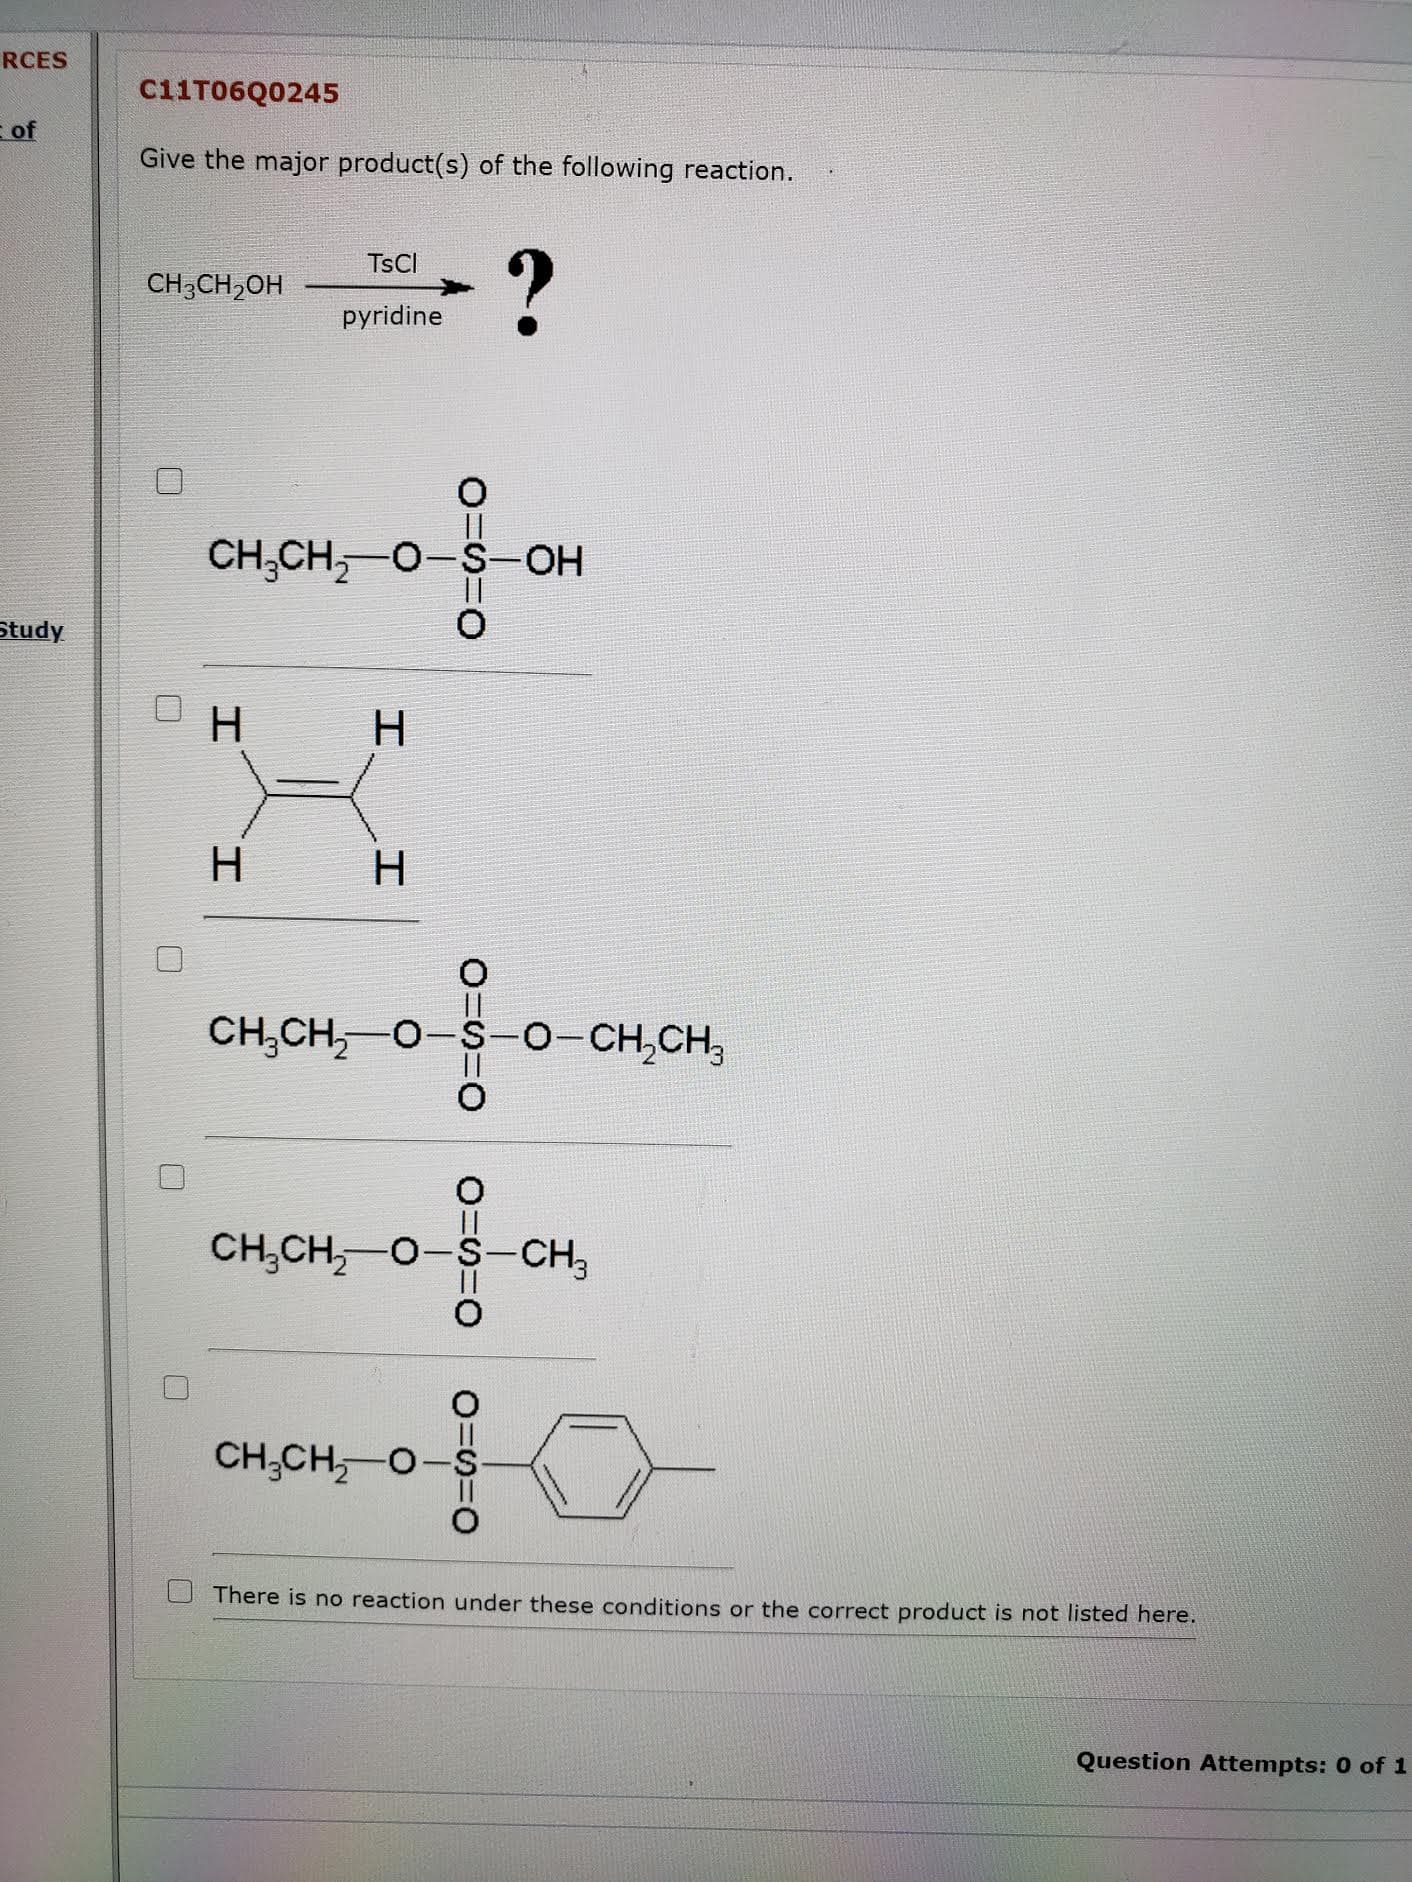 Give the major product(s) of the following reaction.
TSCI
CH3CH2OH
pyridine
